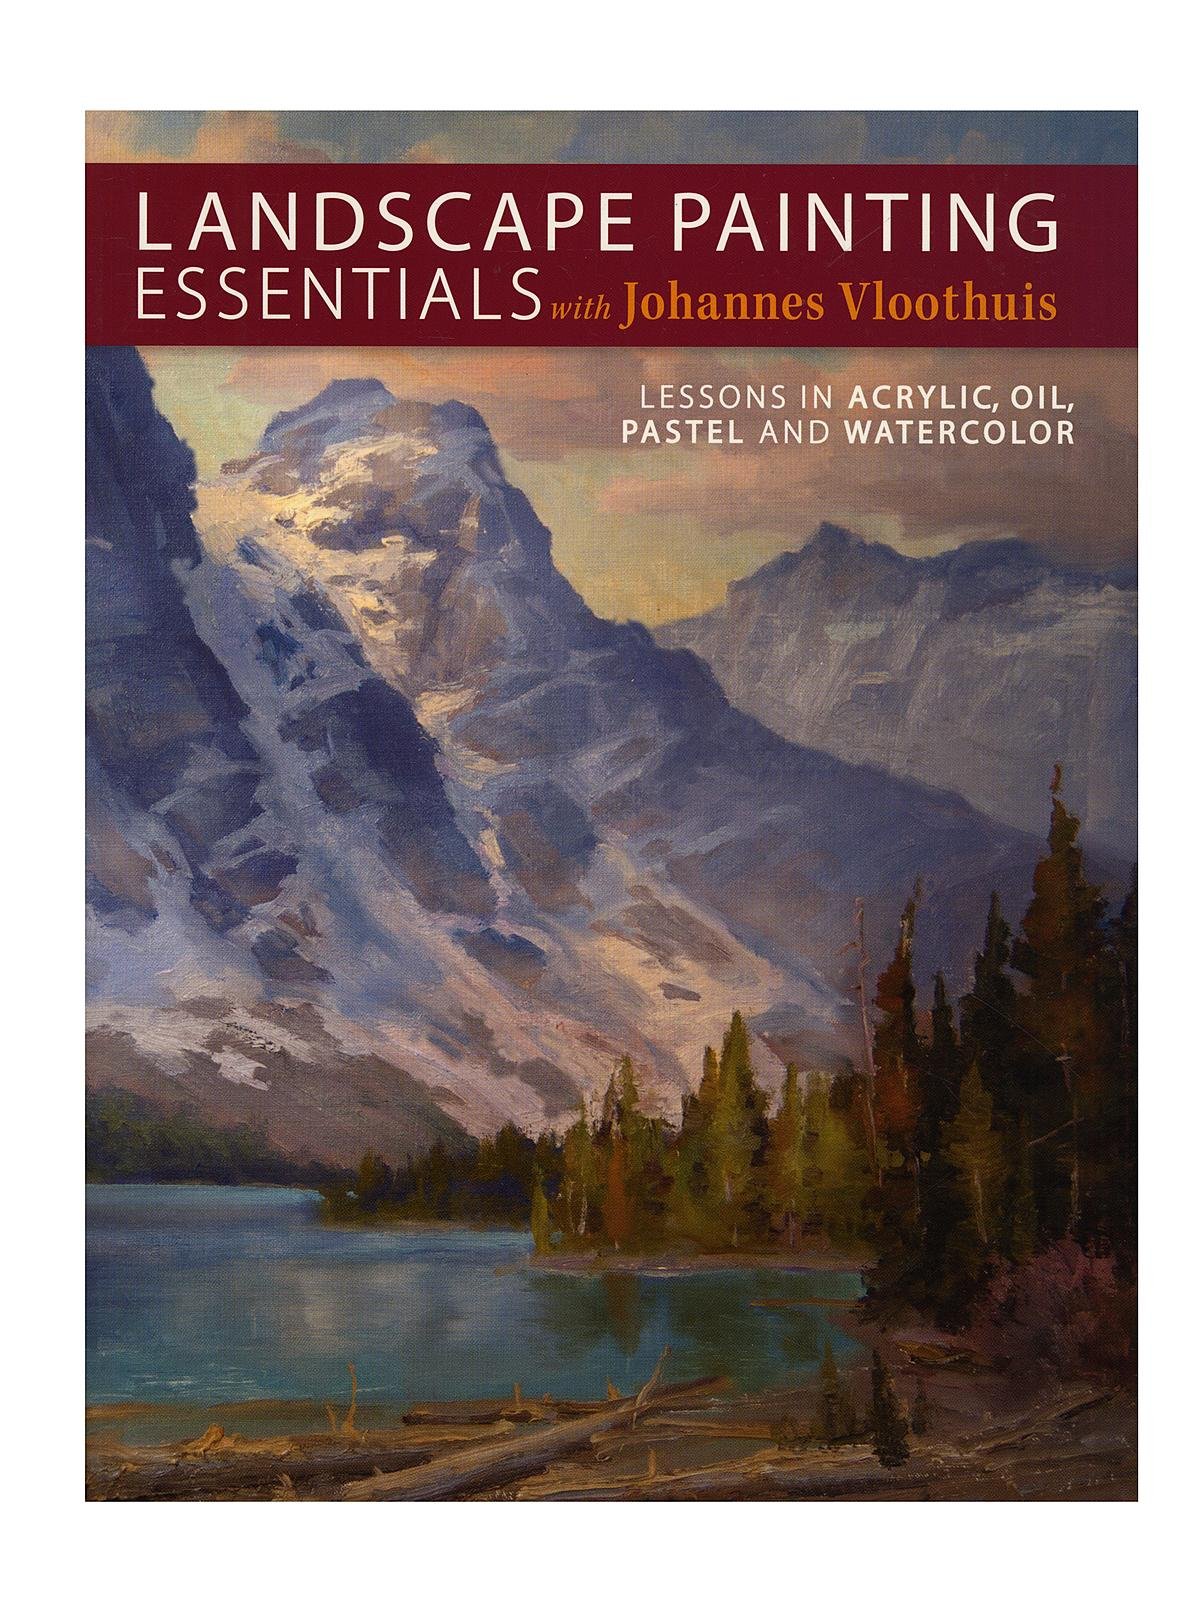 North Light - Landscape Painting Essentials with Johannes Vloothuis